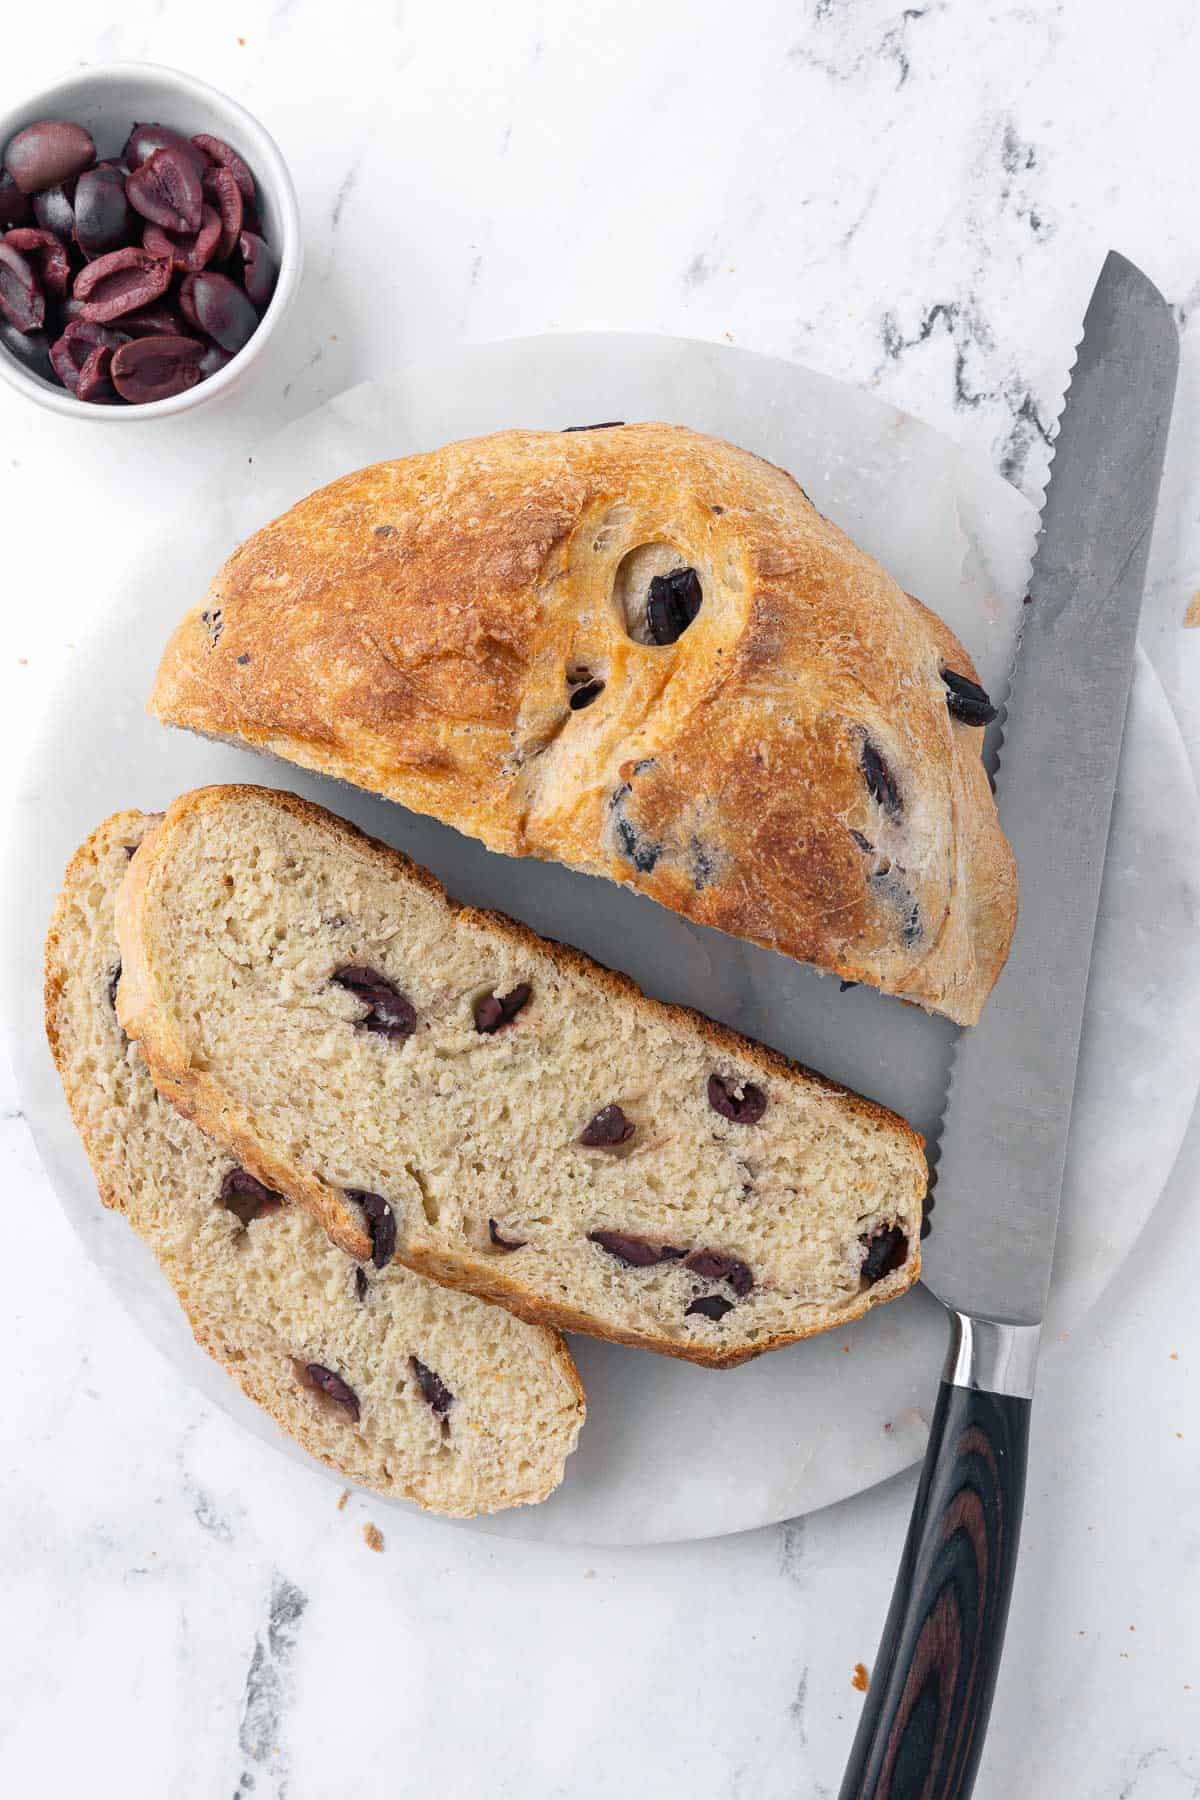 Olive bread with a few slices cut out; a bread knife and bowl of olives nearby.